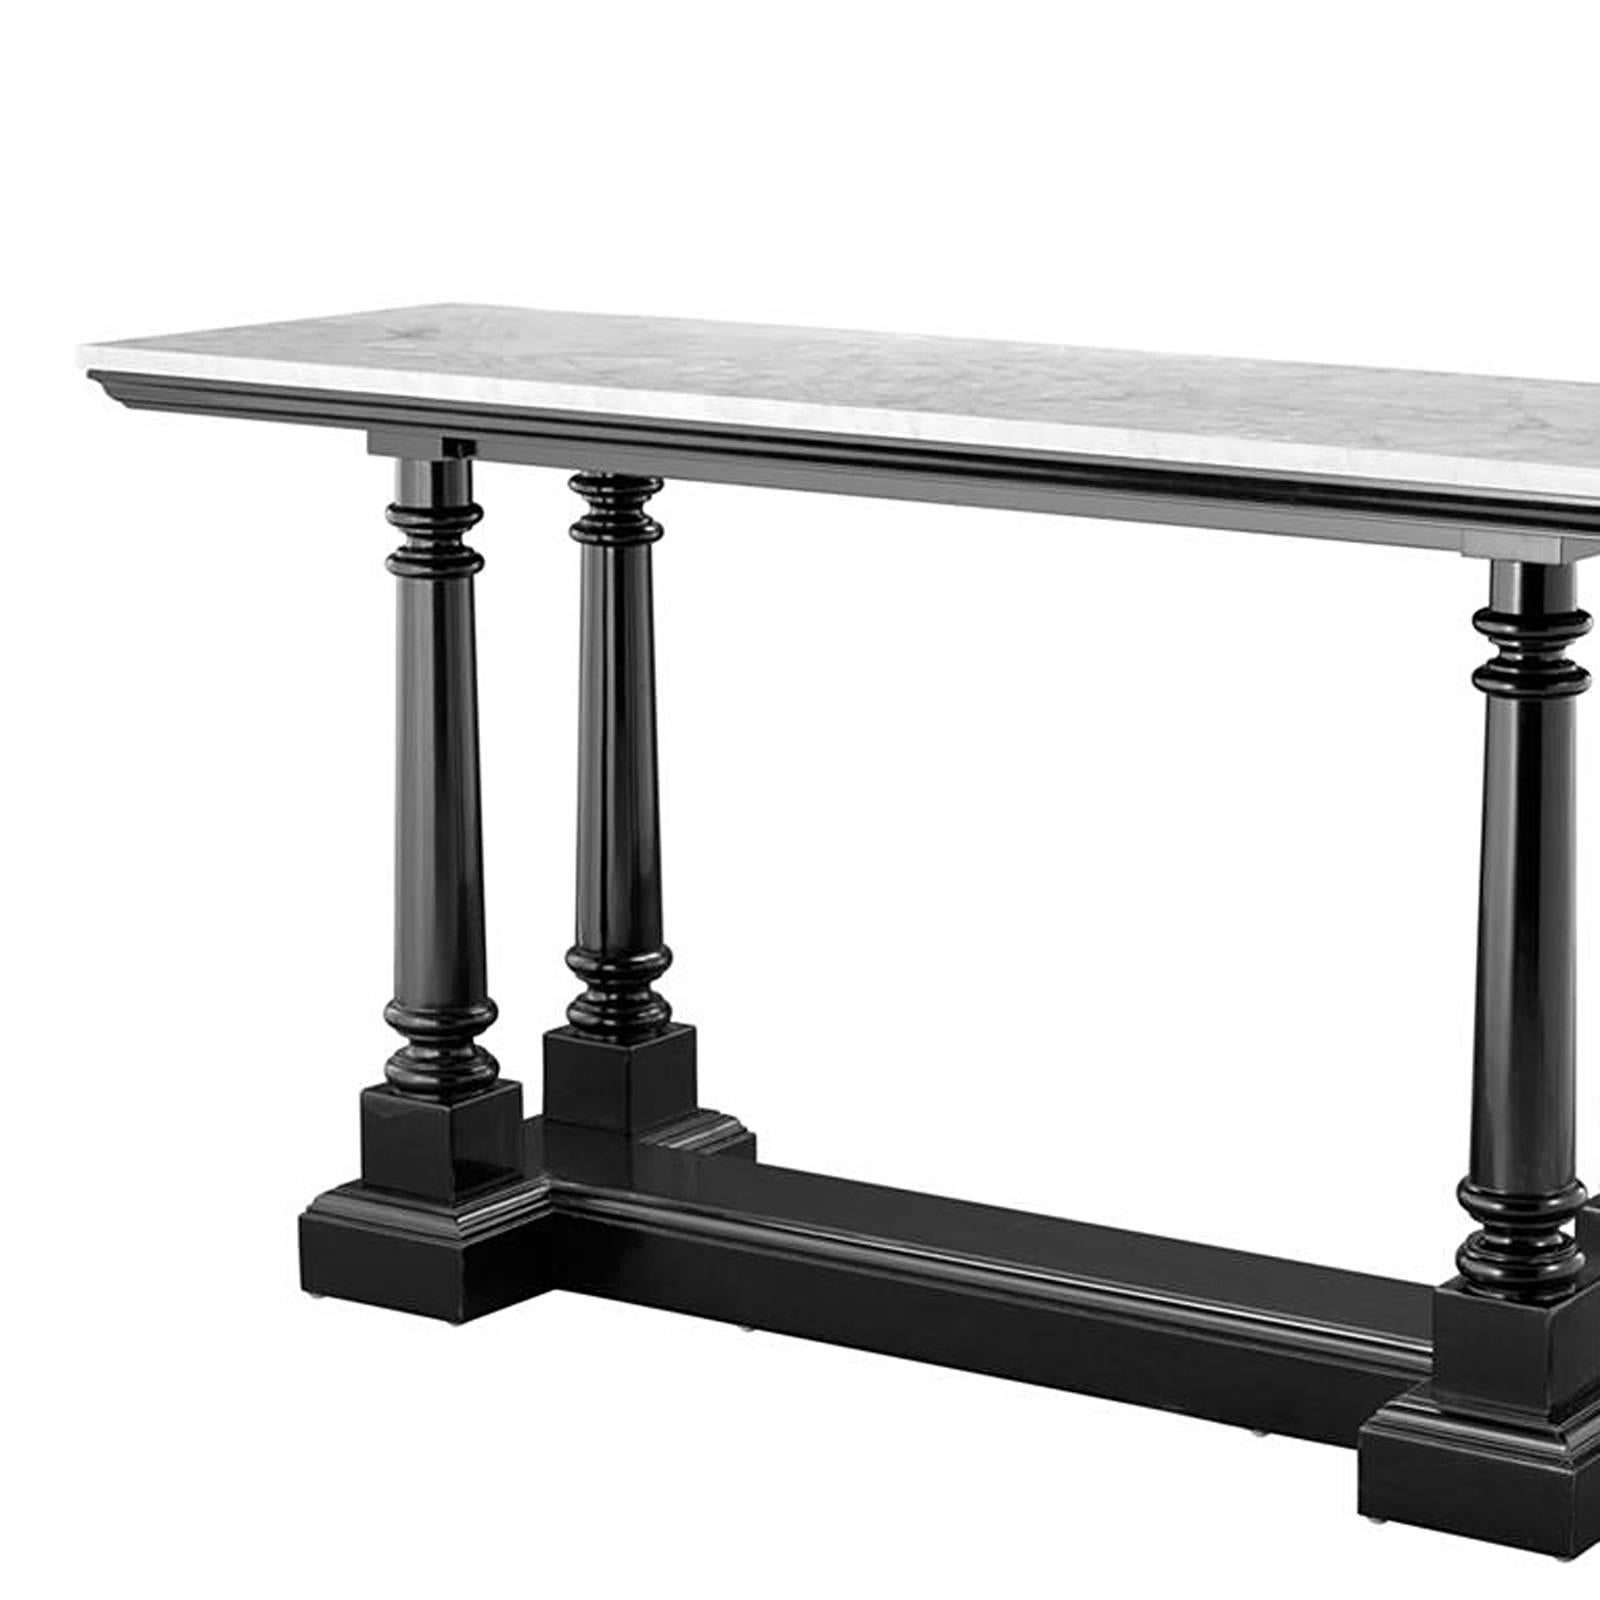 Console Herbstone with structure in solid black
lacquered waxed mahogany wood. With white
marble top. 
